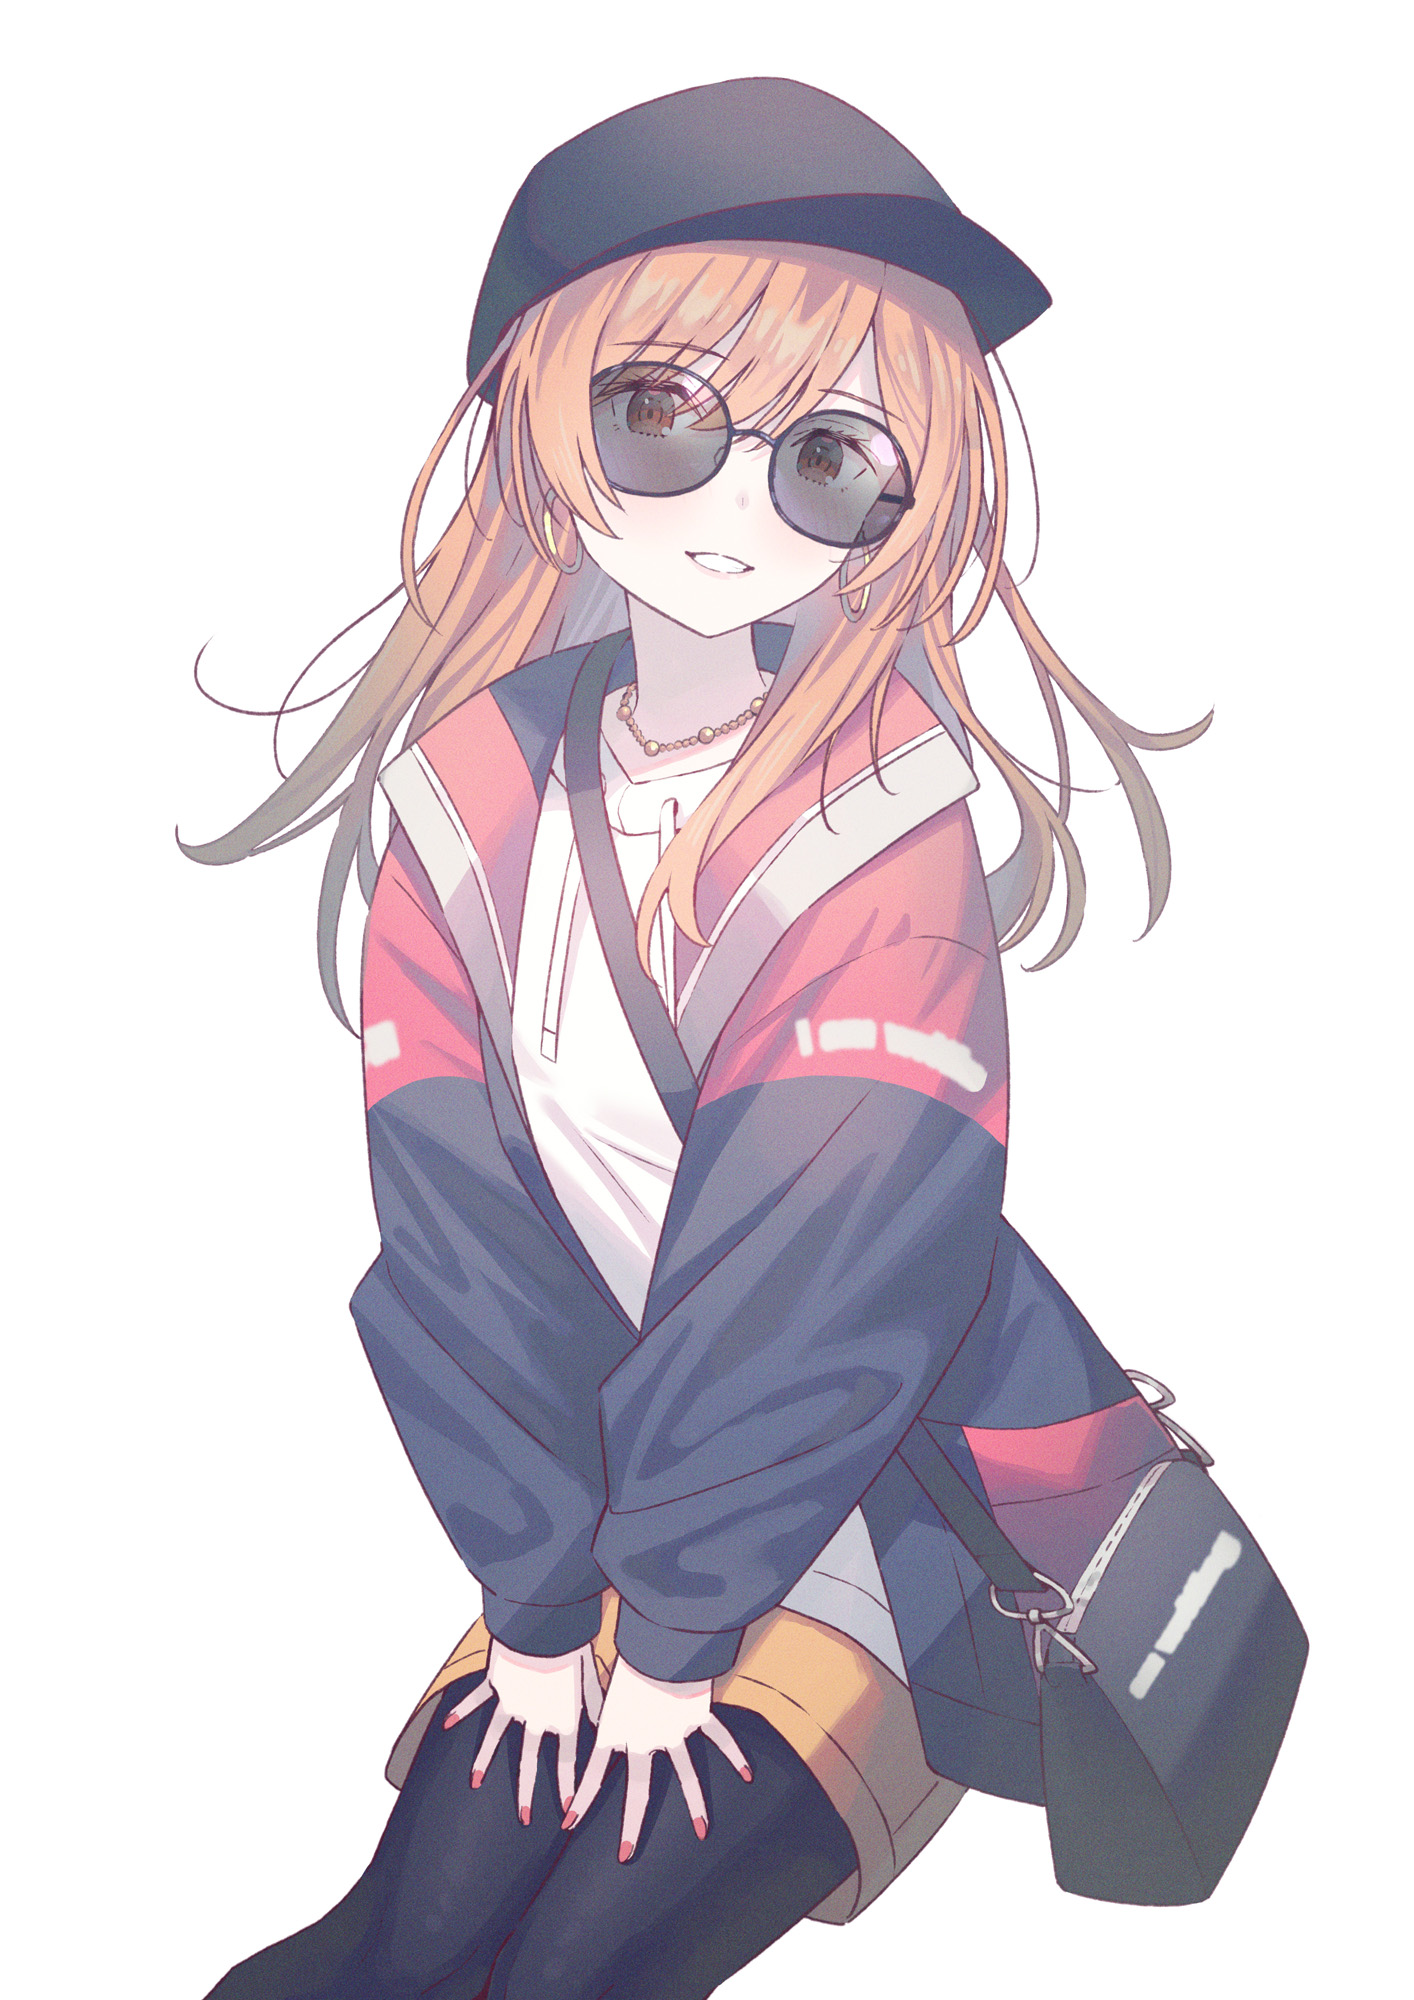 Anime 1414x2000 anime anime girls digital art artwork Pixiv portrait portrait display looking at viewer 2D hat sunglasses purse long hair earring hoop earrings necklace white background simple background minimalism